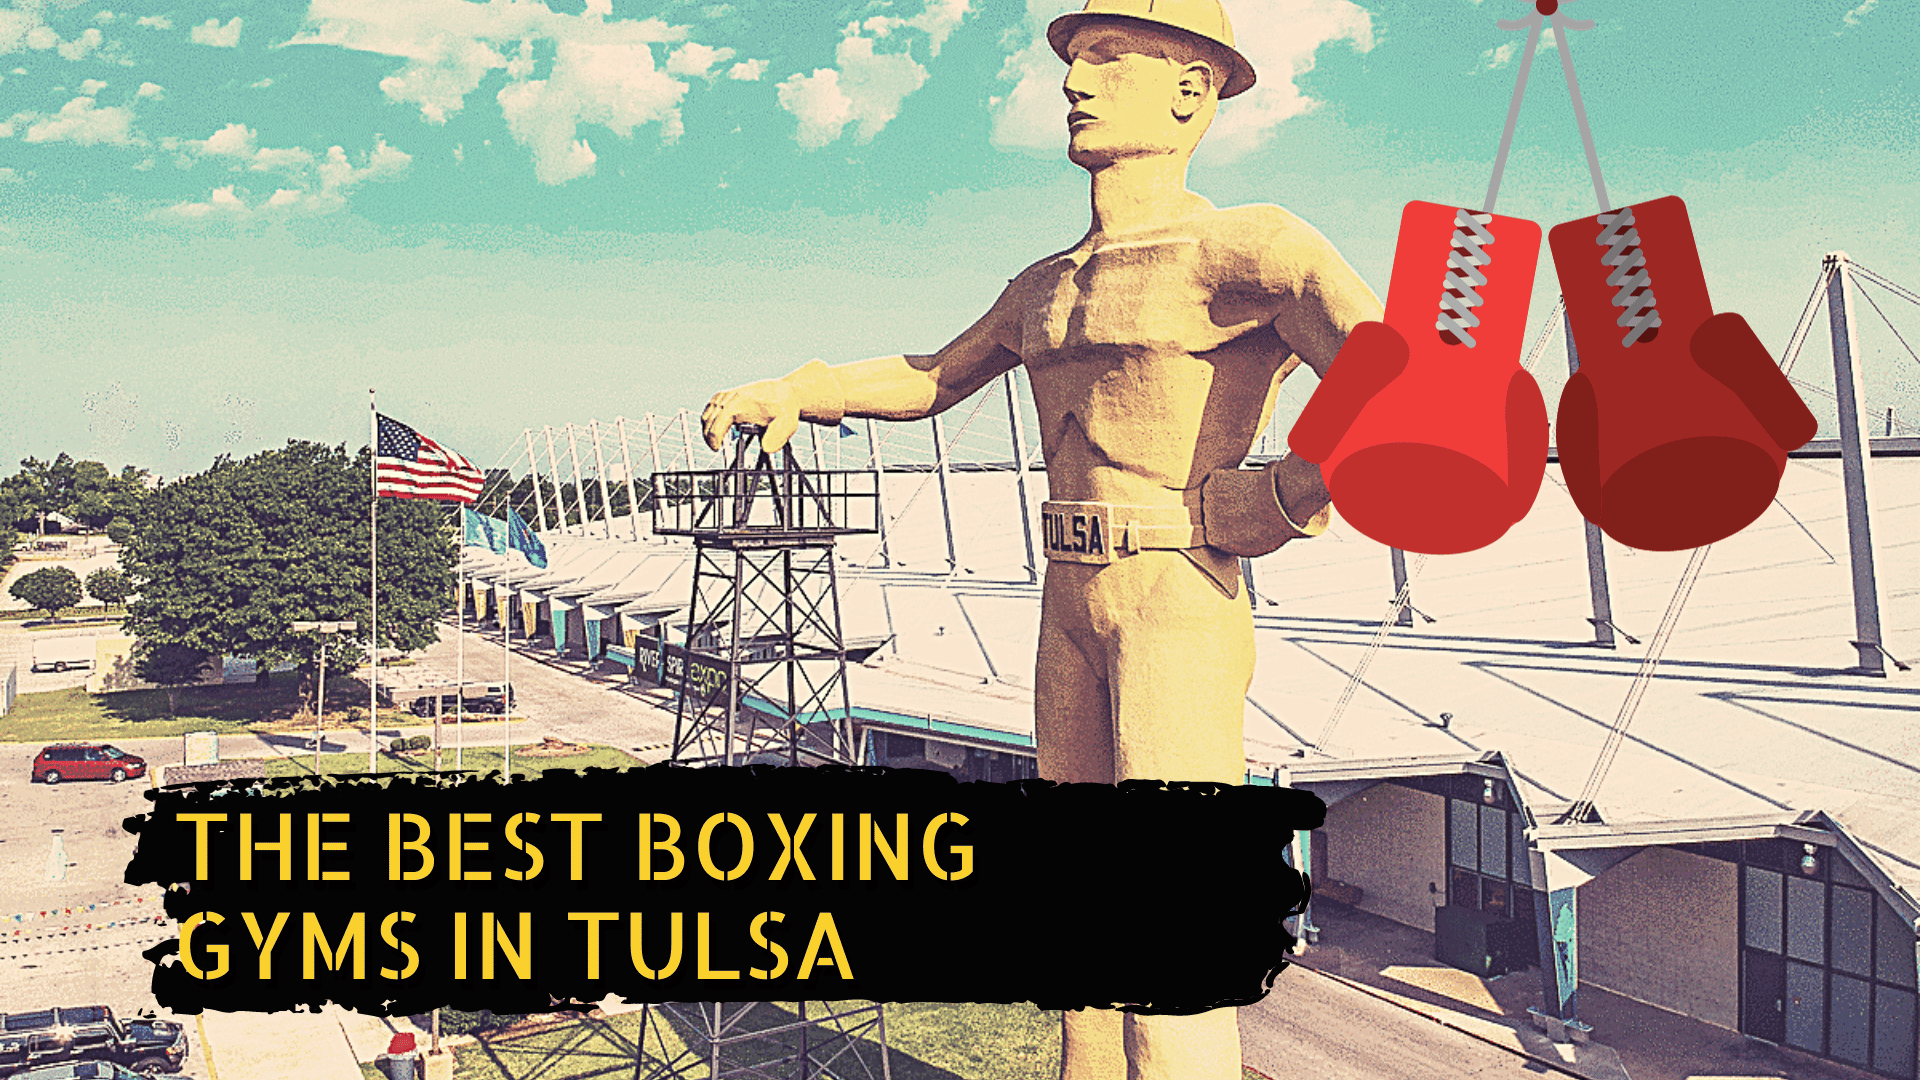 Tulsa skyline and the title the best boxing gyms in Tulsa